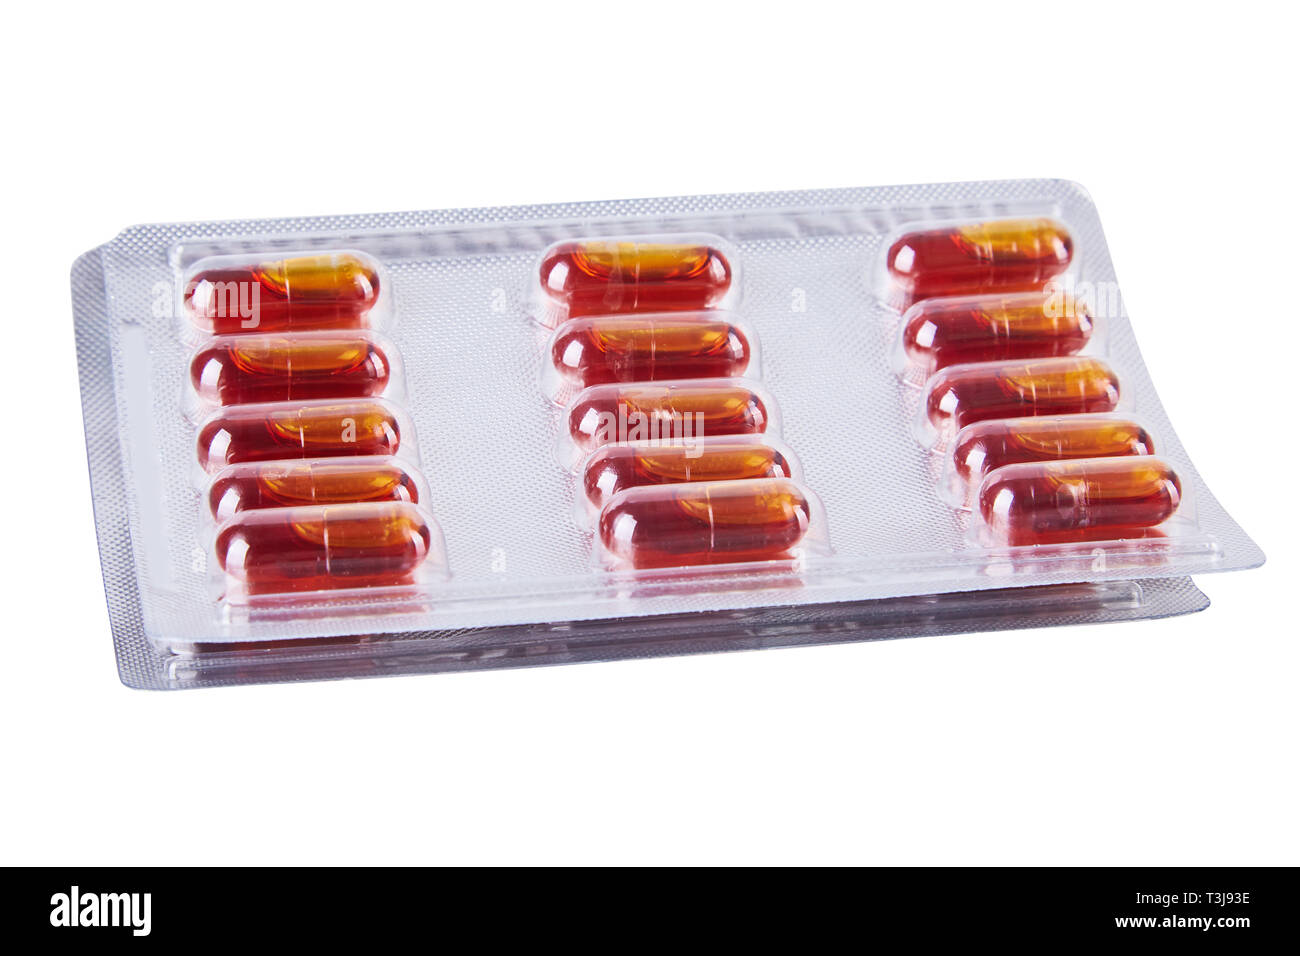 Krill oil capsules in blister pack isolated on white background Stock Photo